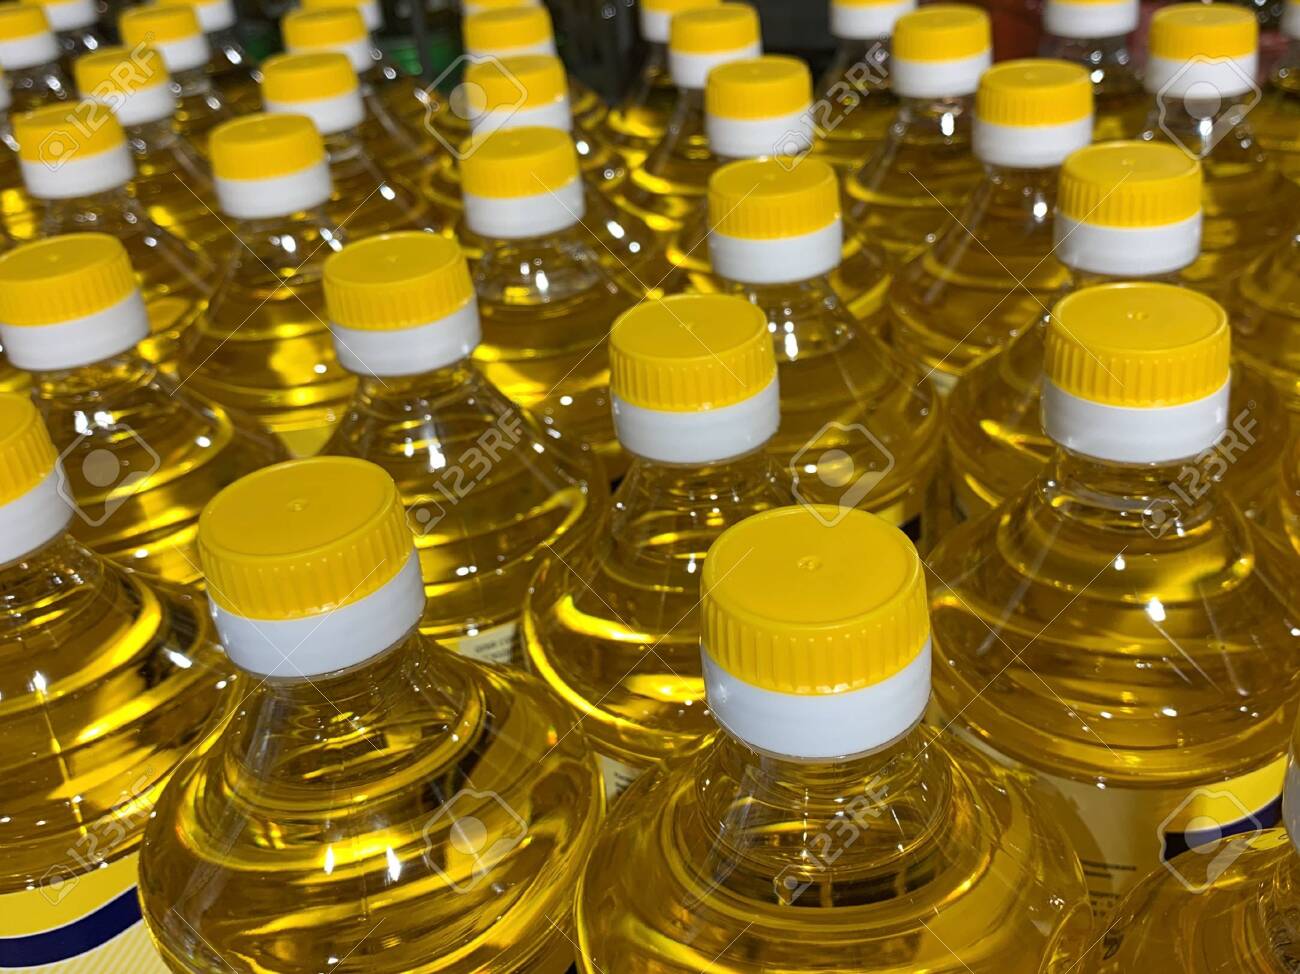 Refined Sunflower oils from Derons oil limited